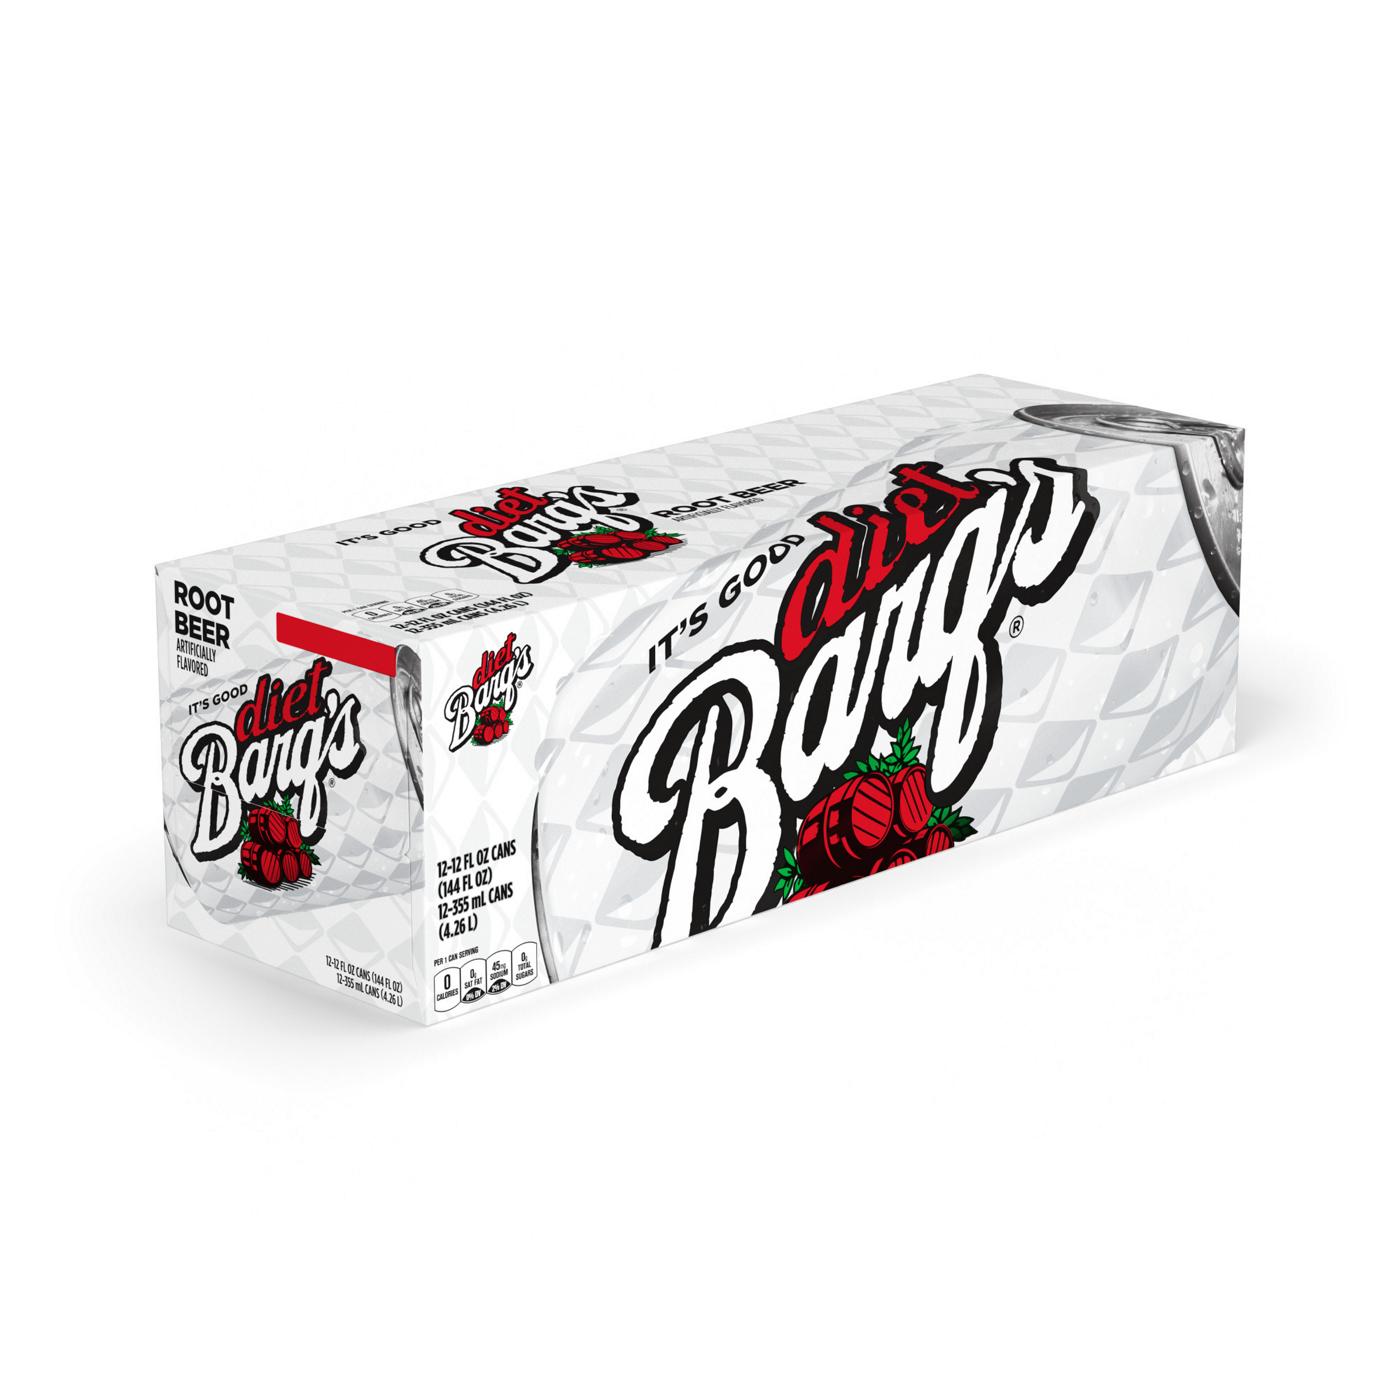 Barq's Diet Root Beer 12 oz Cans; image 1 of 2